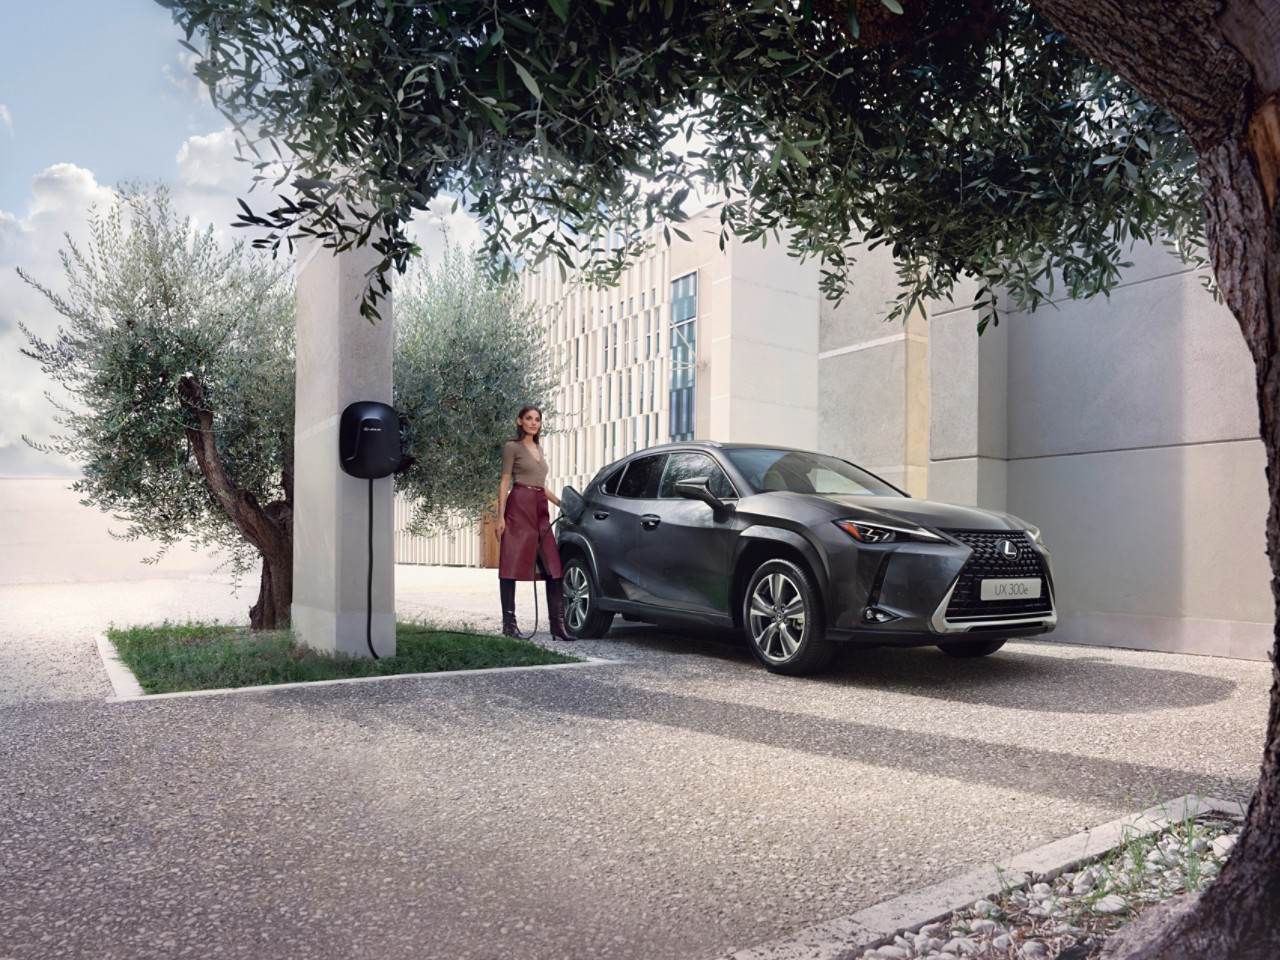 Lexus UX 300e being charged in public